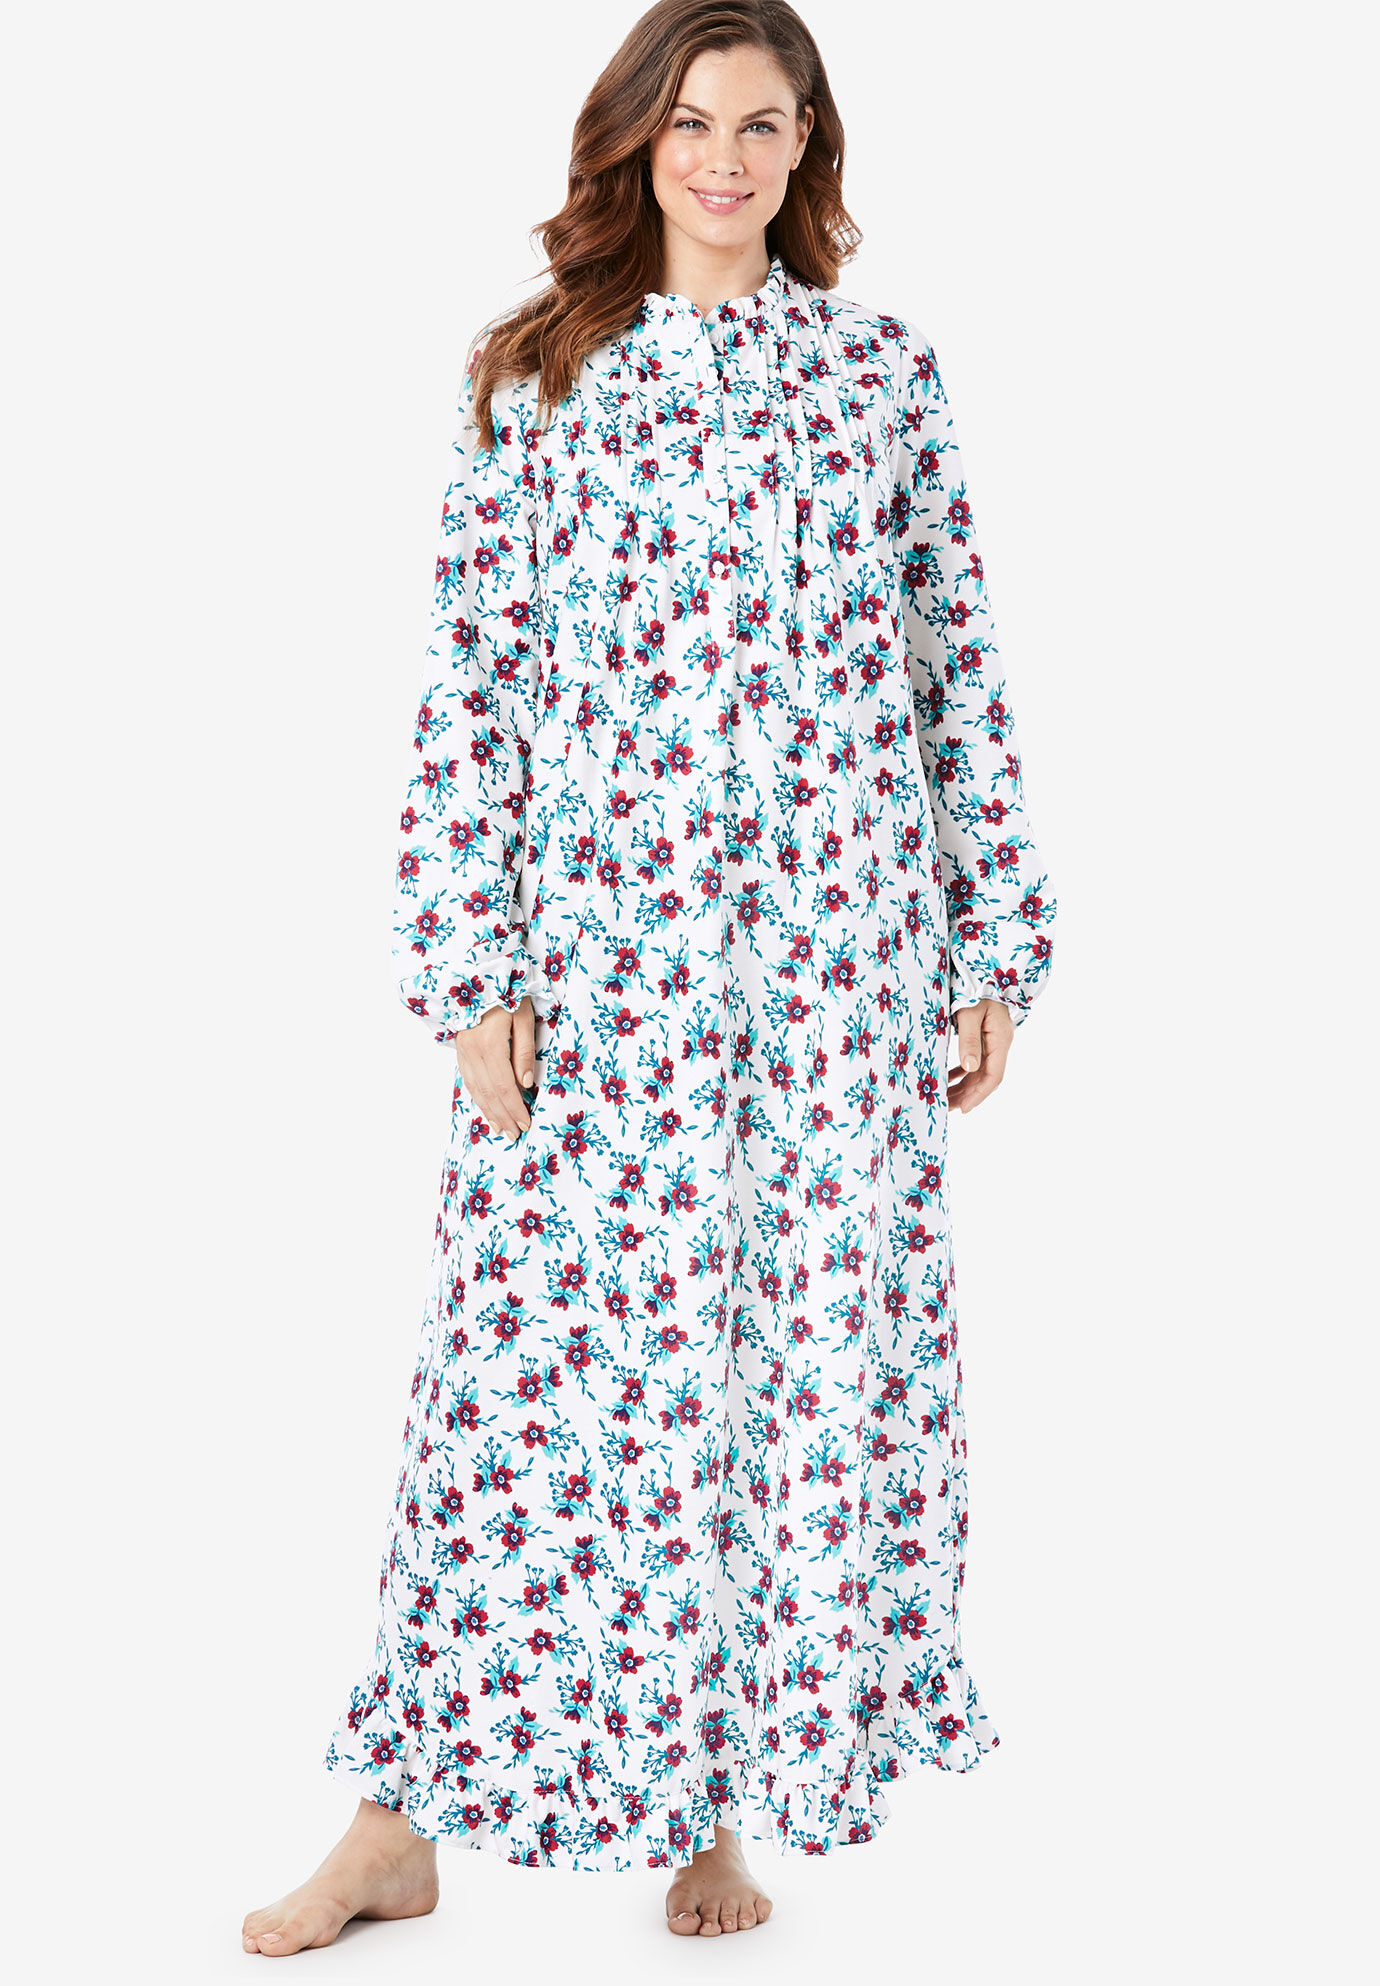 long flannel nightgowns plus size